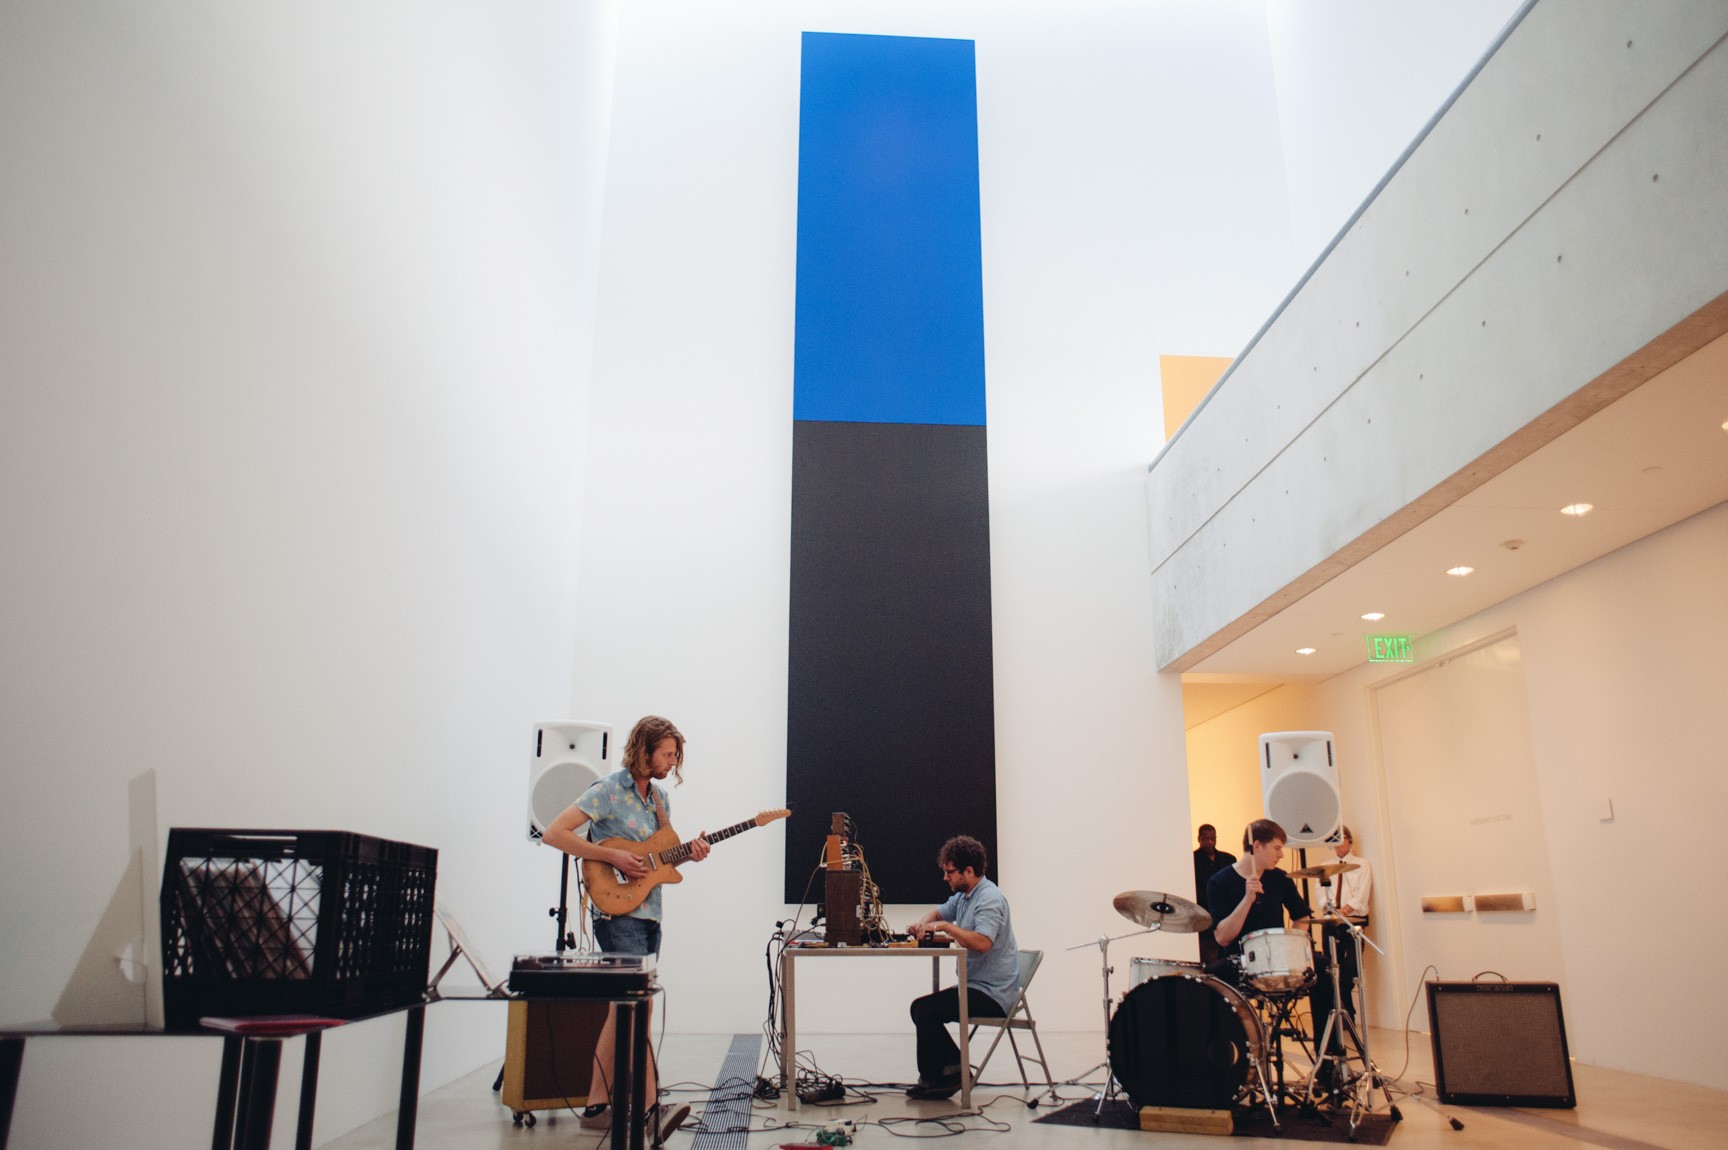 Sun Bros performs in the Lower-Main Gallery in front of Kelly's "Blue Black."